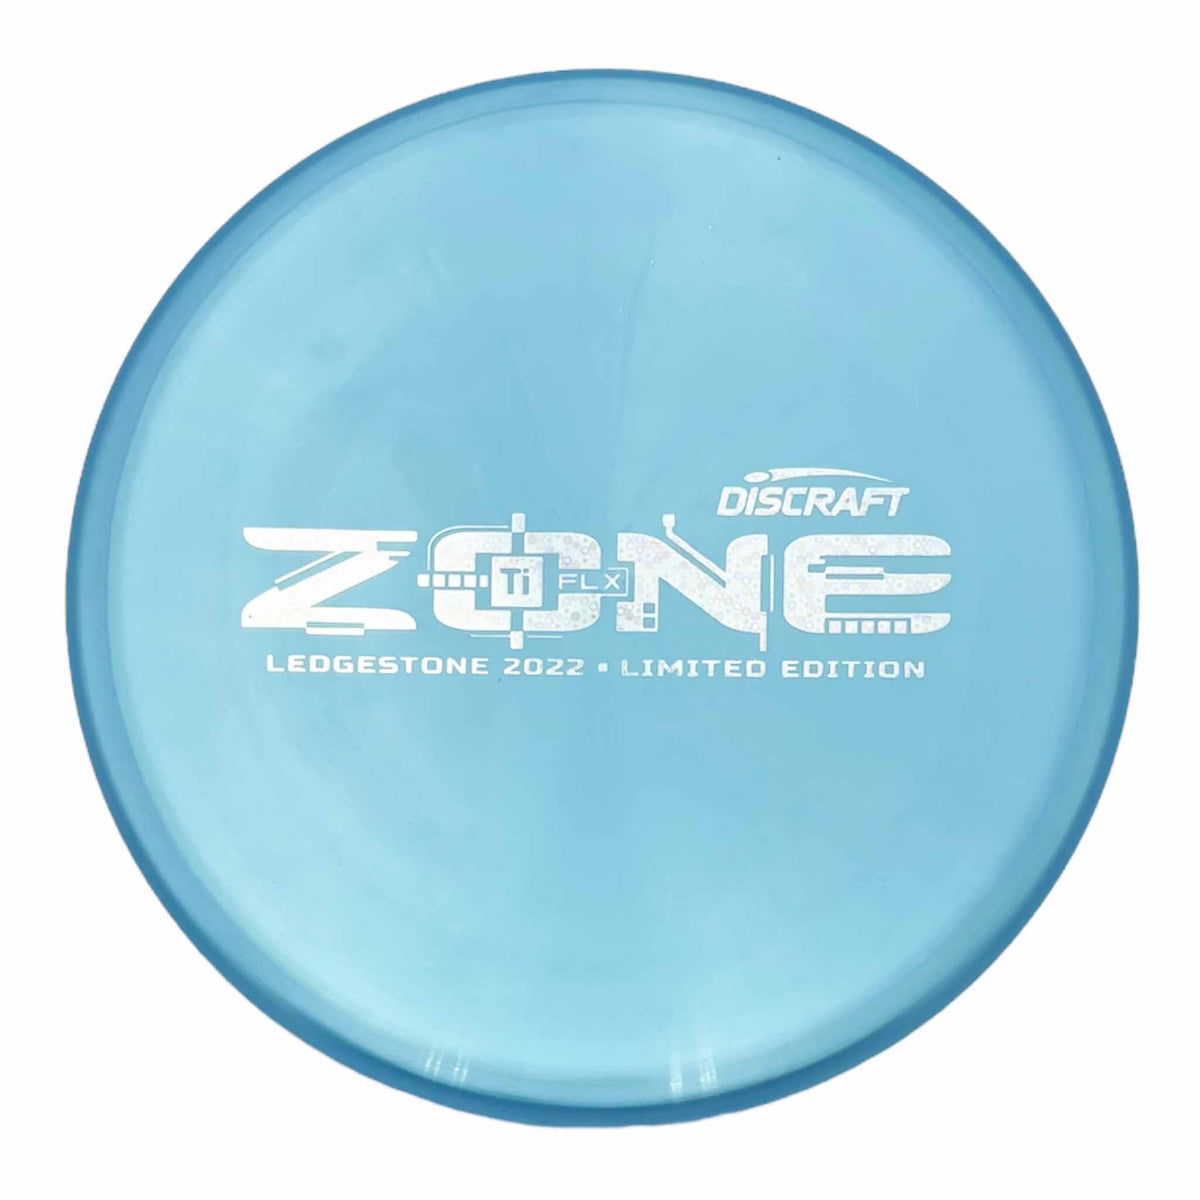 Discraft 2022 Ledgestione Limited Edition Ti FLX Zone putter and approach - Blue / Silver